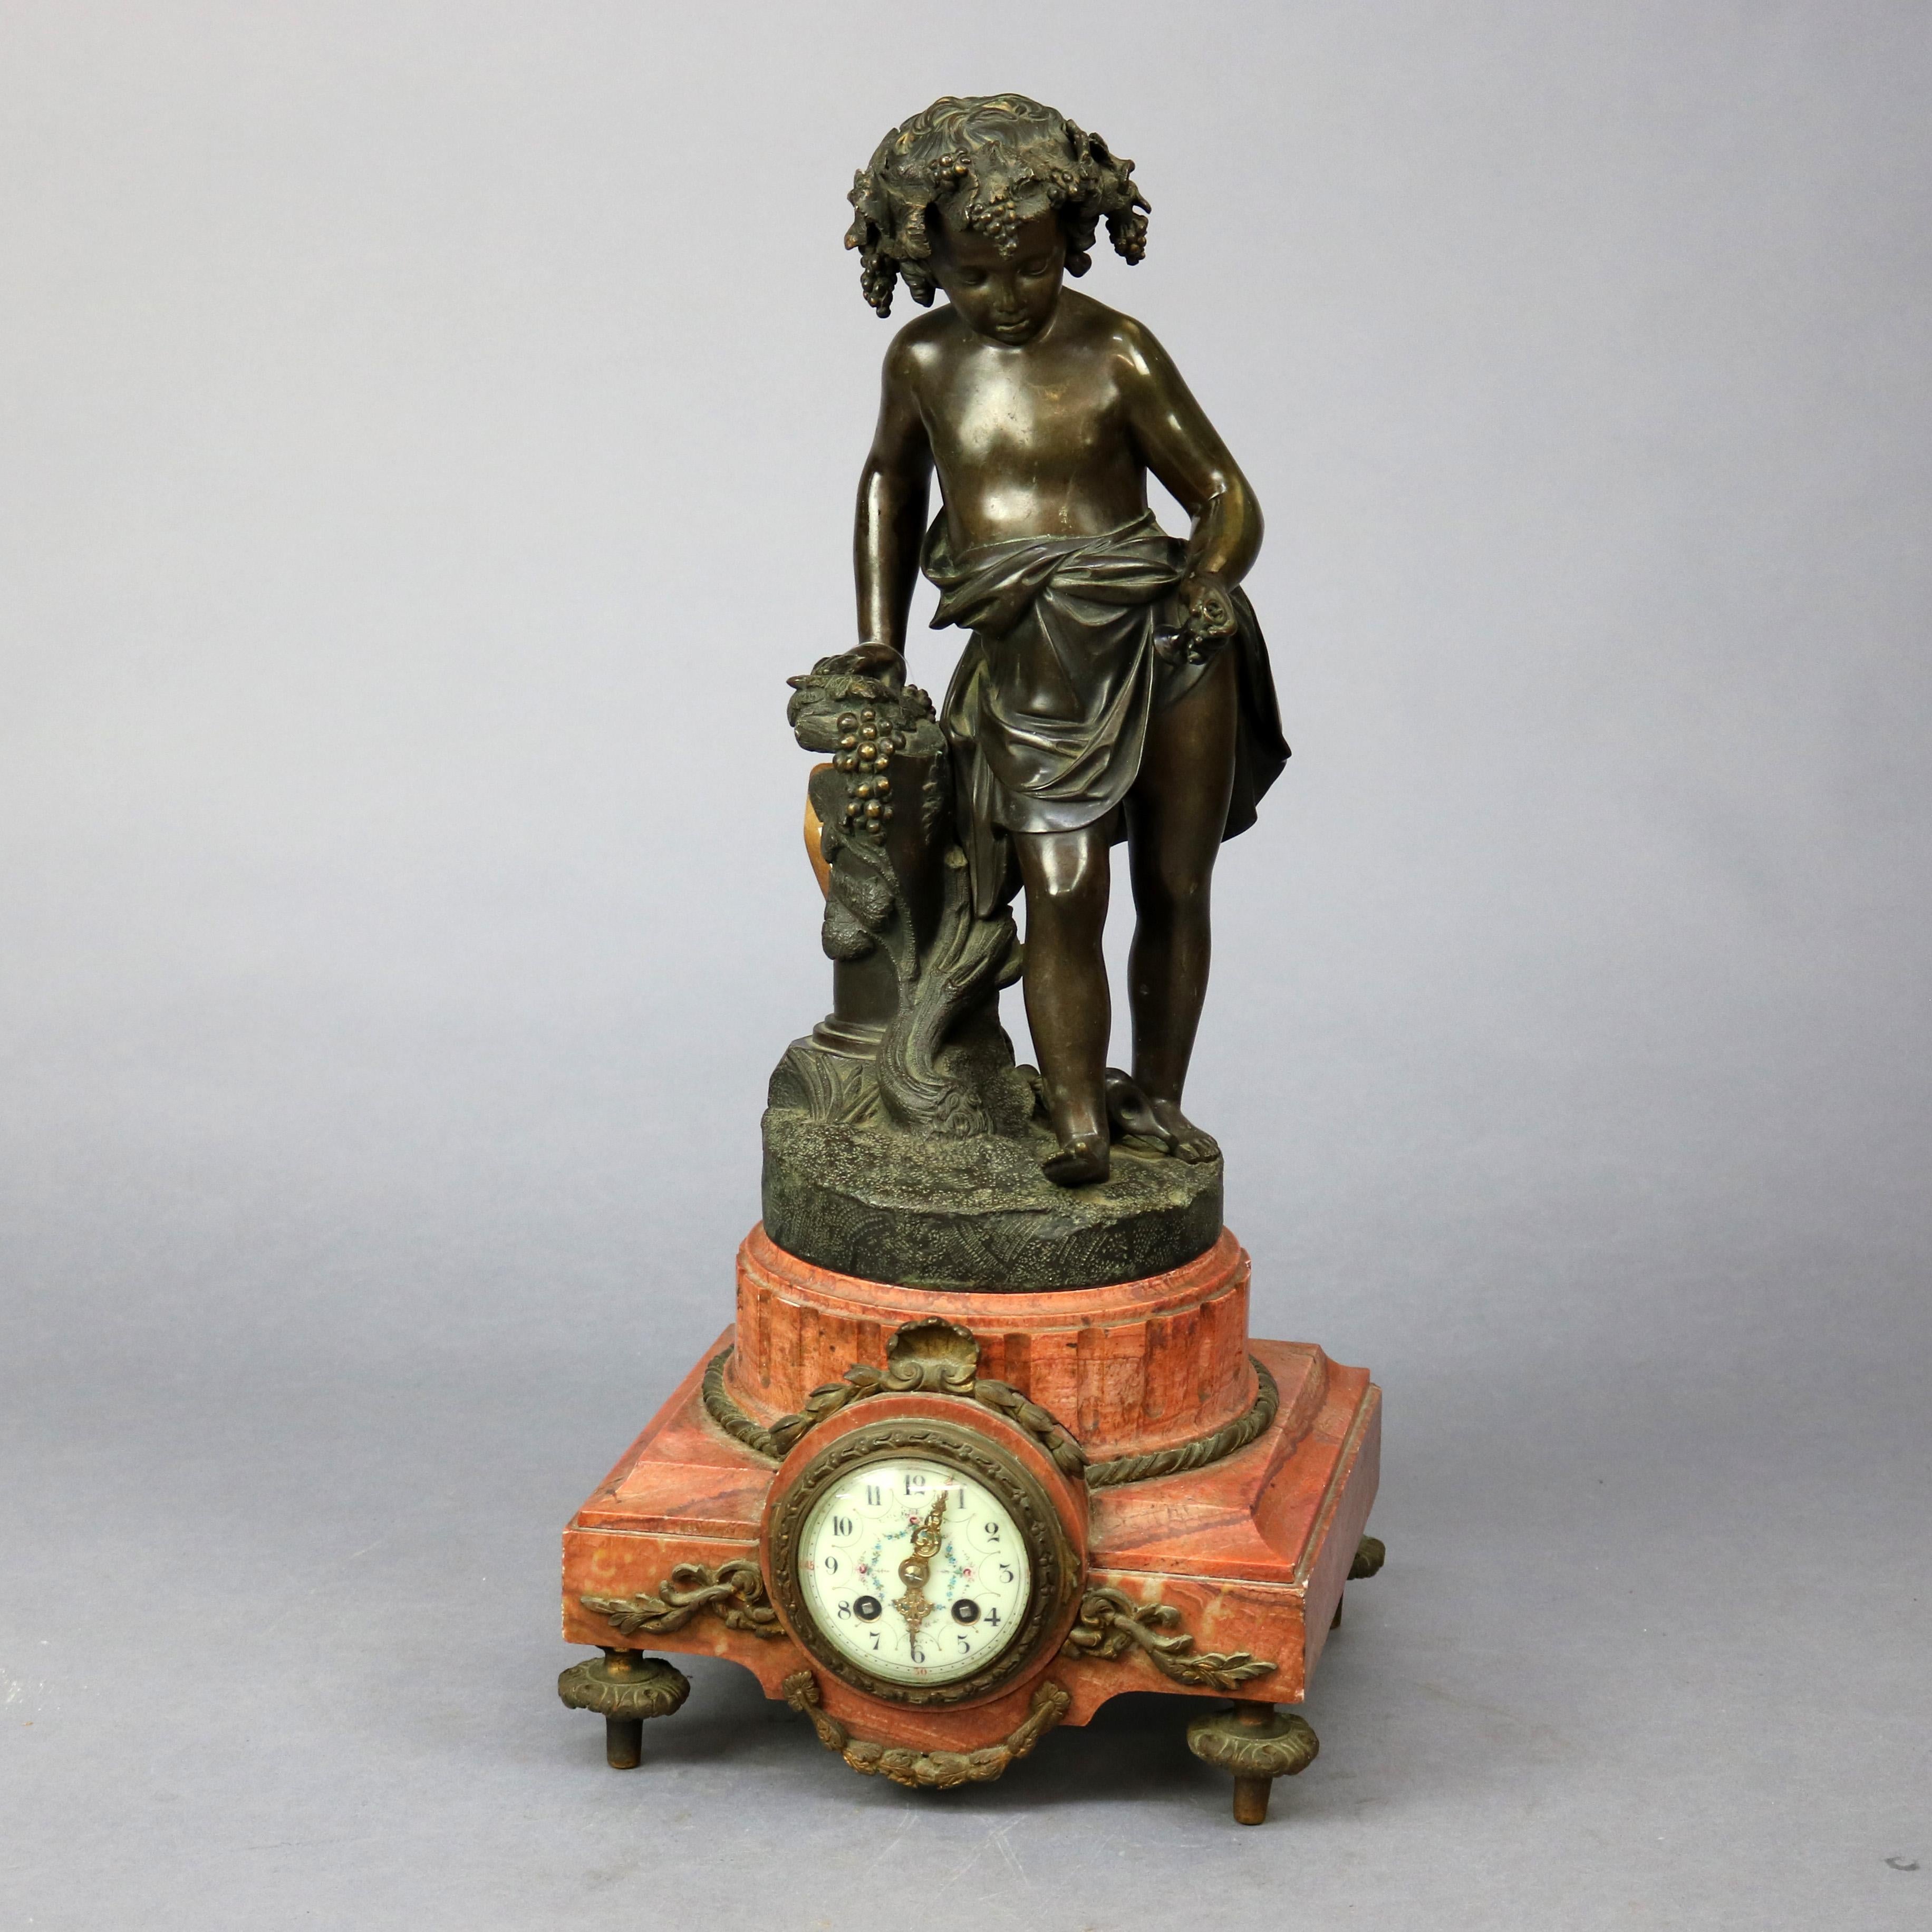 Antique French Clock with Classical Bronze Sculpture of Young Boy, Circa 1890 4